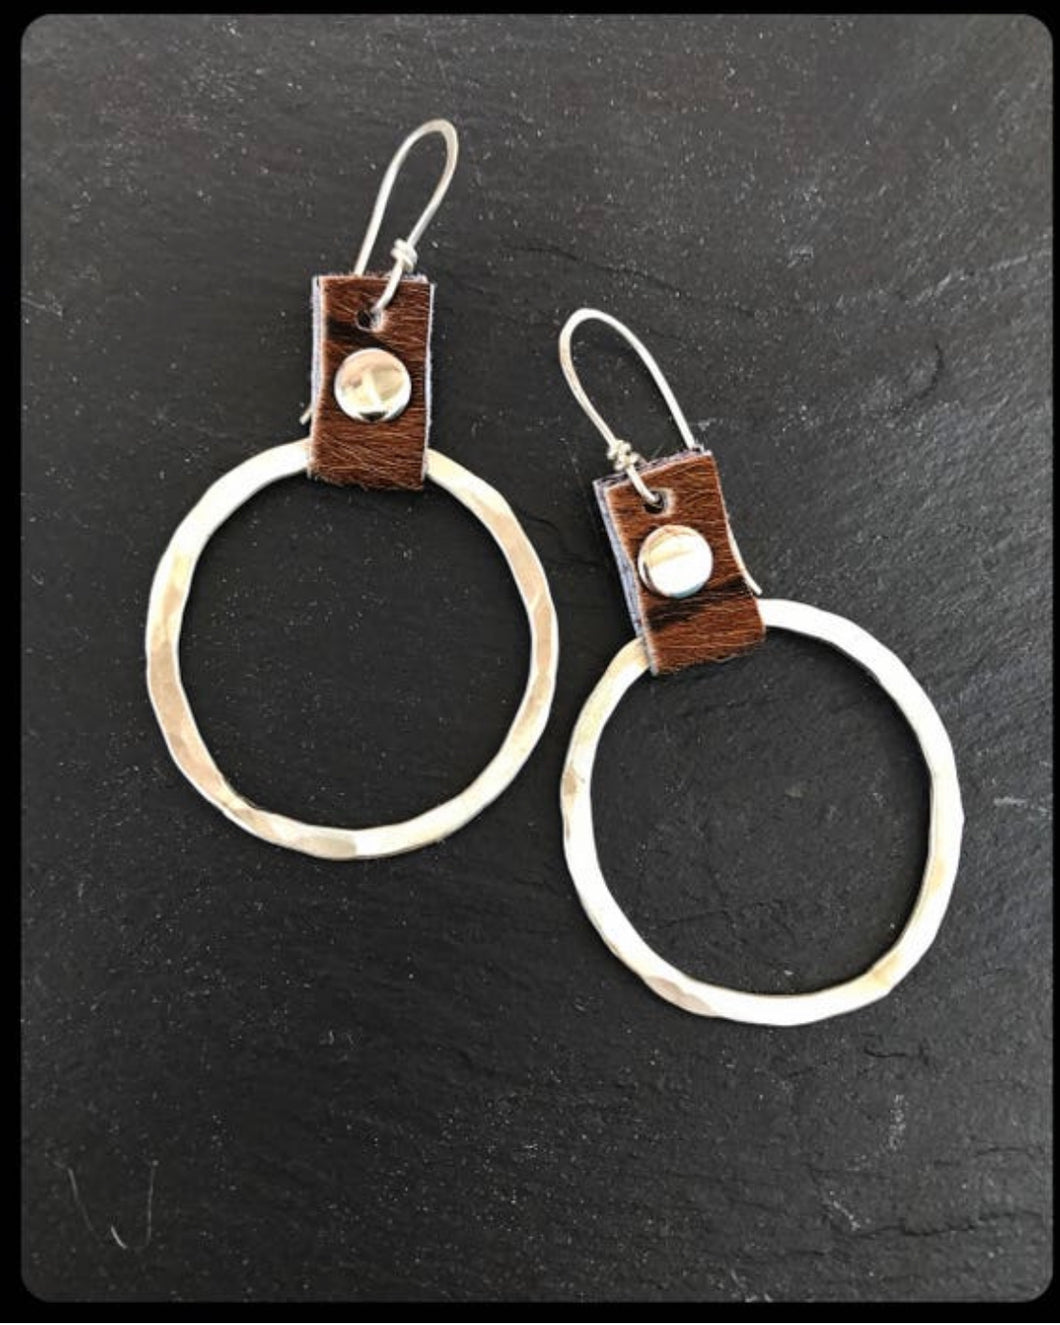 Take The Lead Earrings- brown leather - Obscuro Jewelry - sterling silver hoops